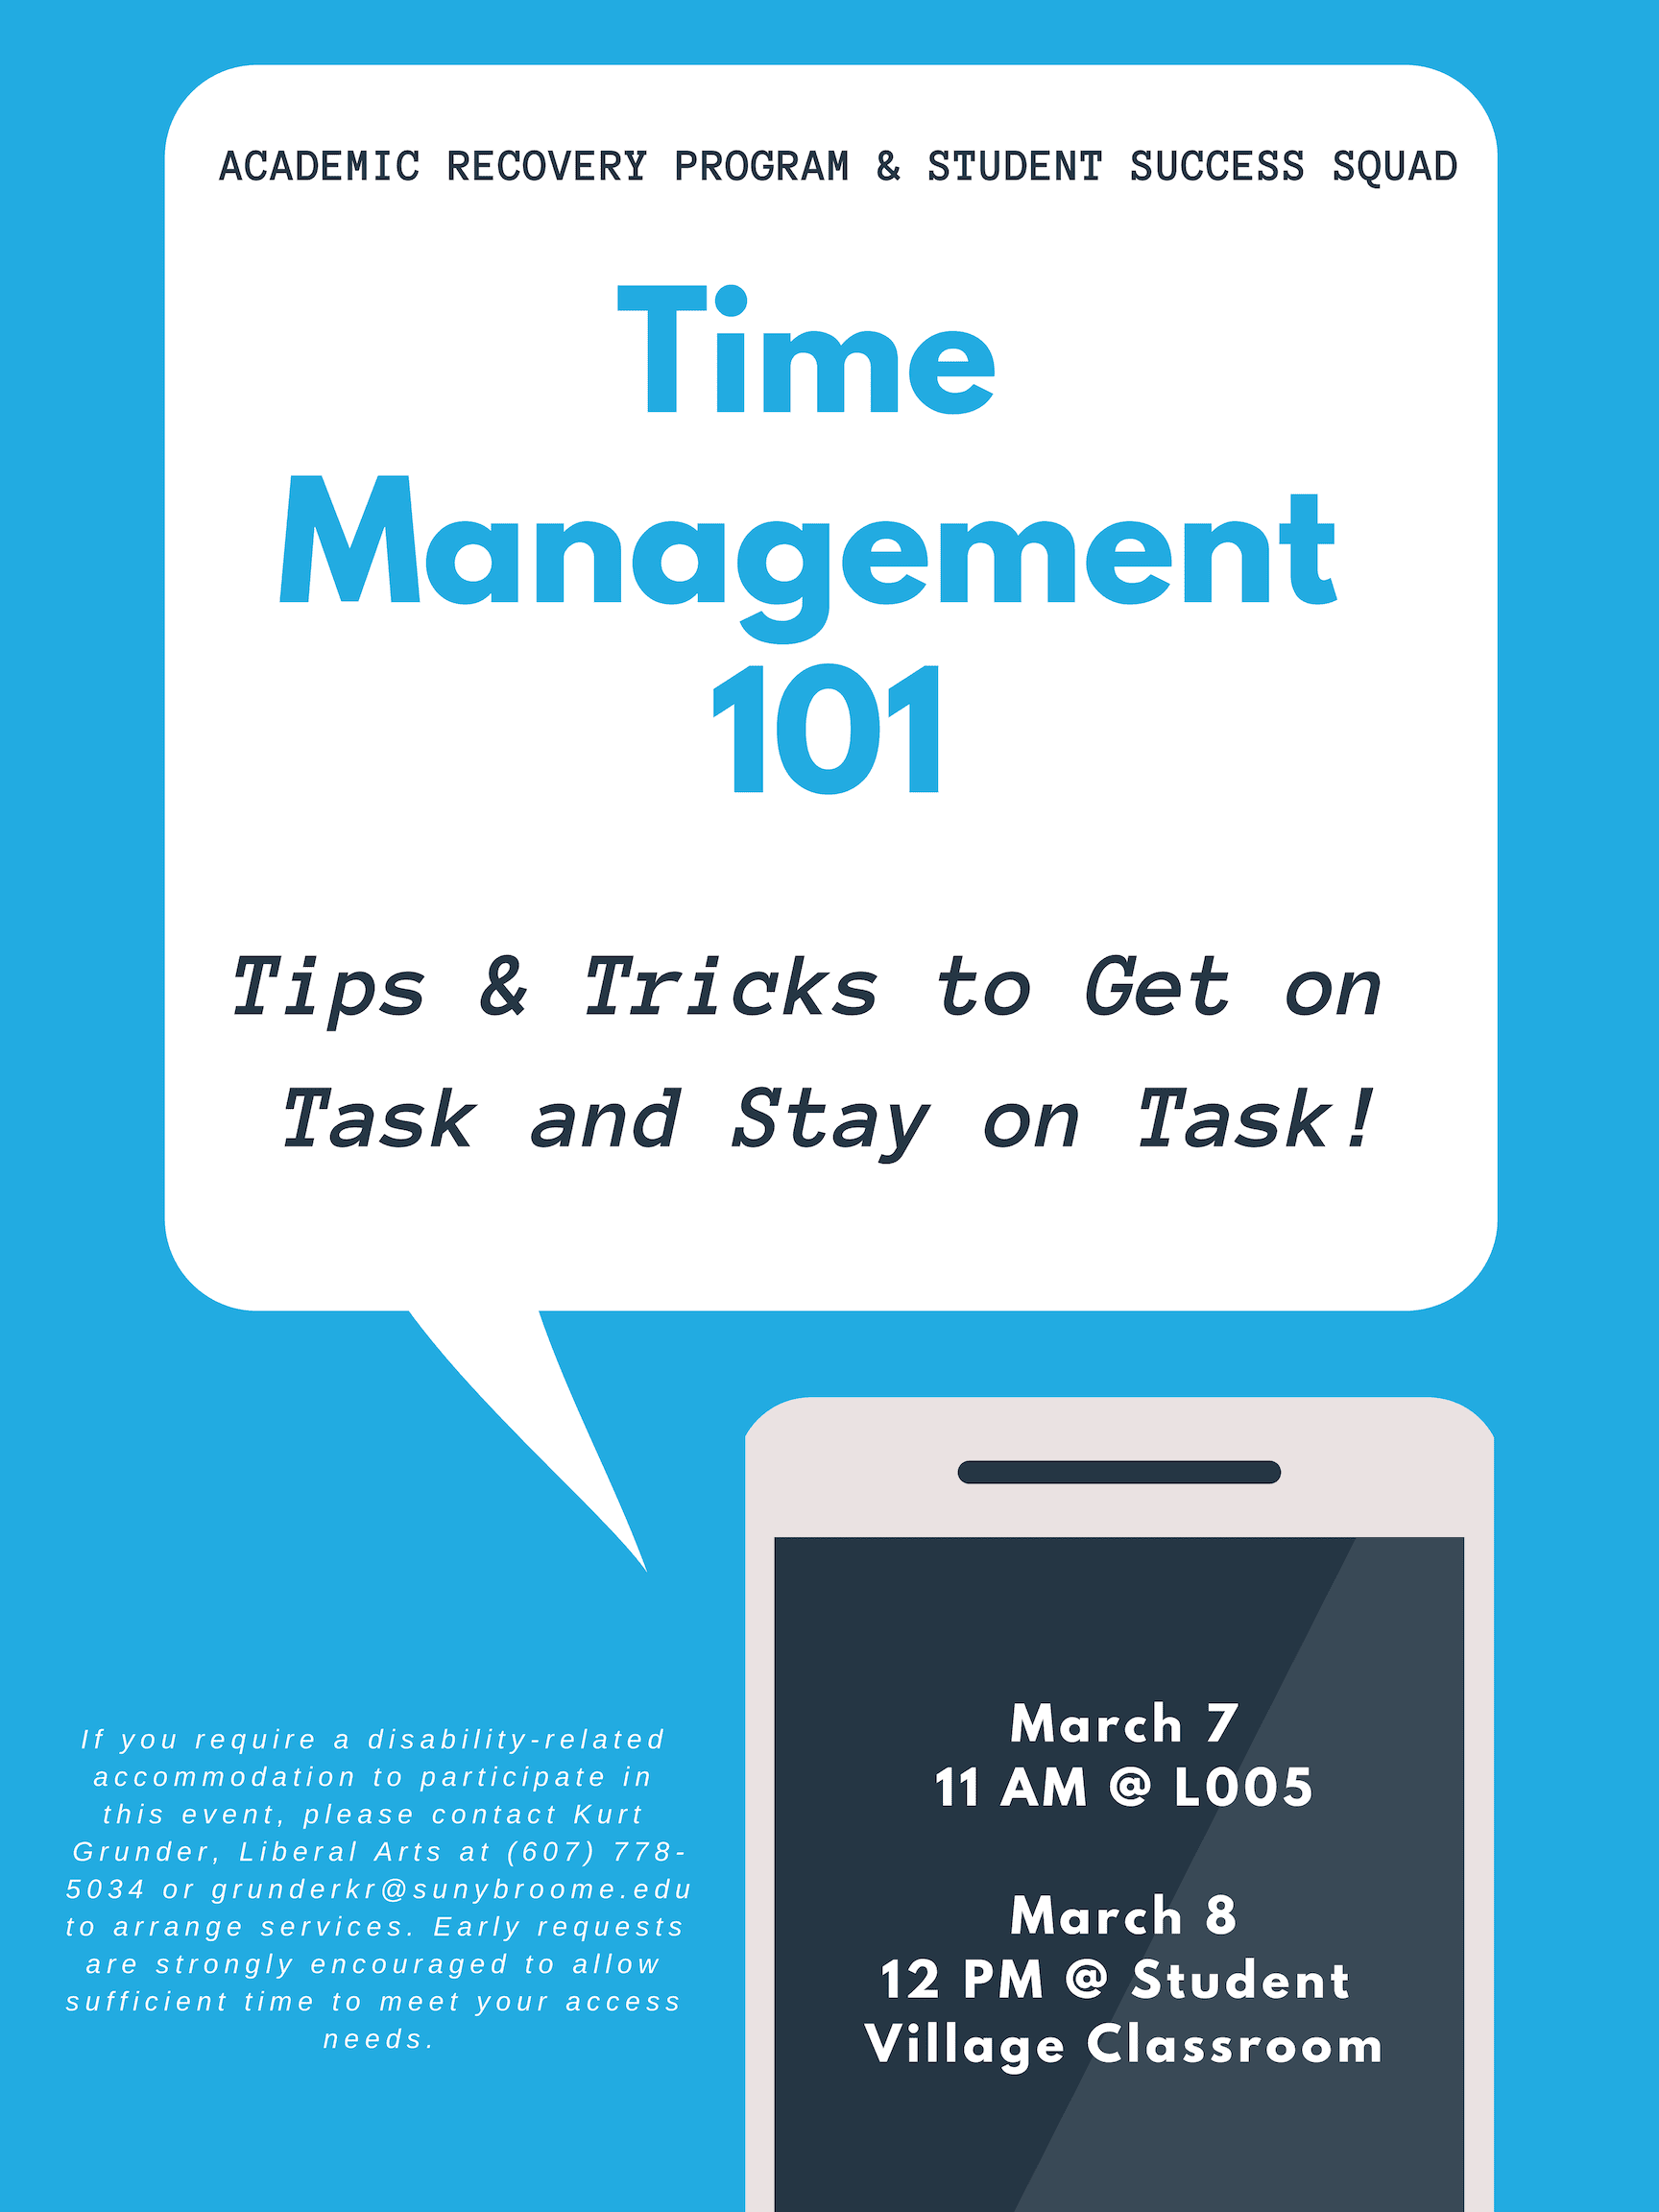 Stay on Task: Time Management 101 on March 7 and 8